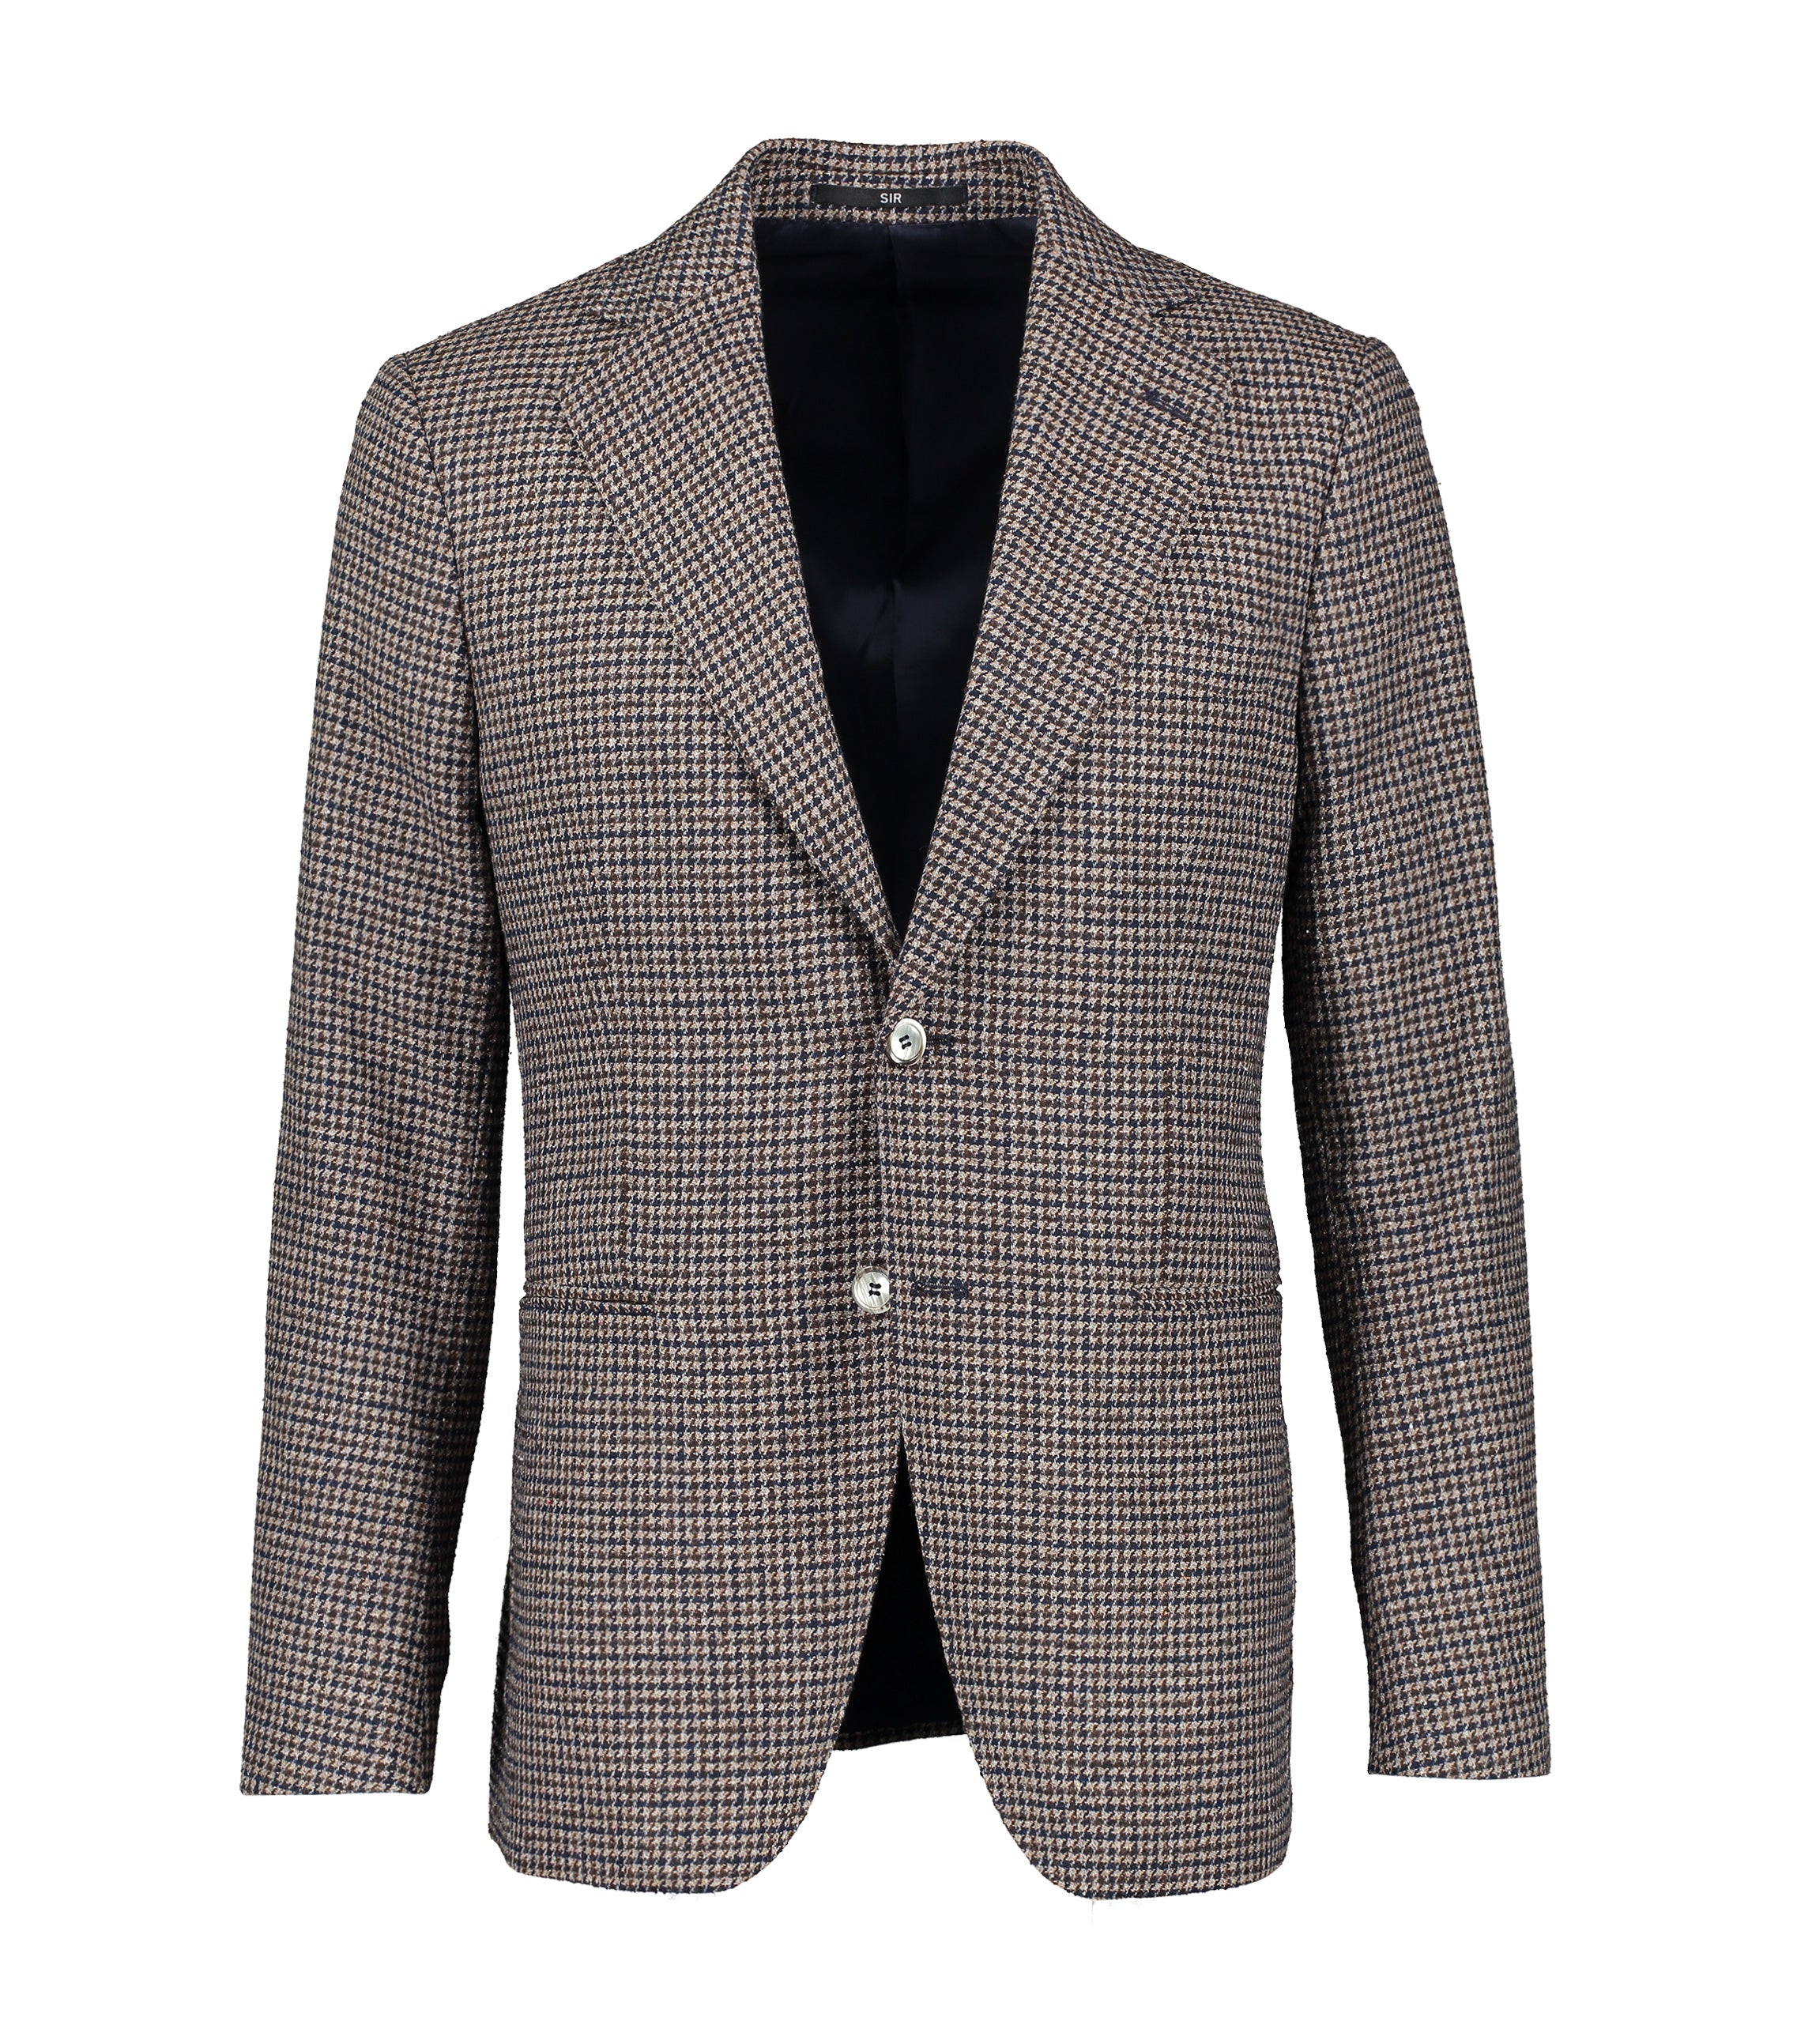 Eliot Brown and Blue Houndstooth Jacket